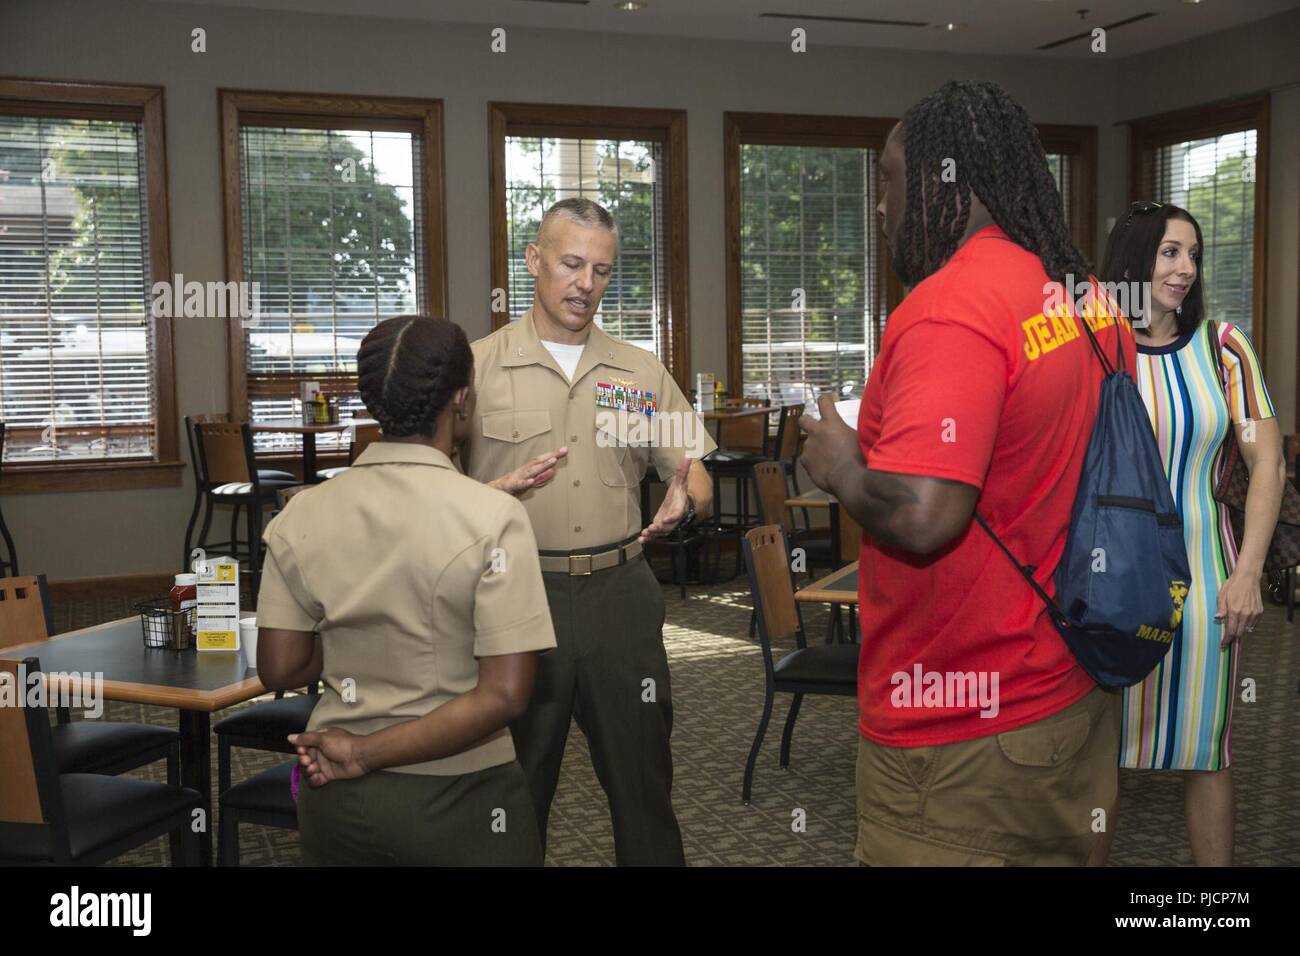 U.S. Marine Corps Maj. Villiana Jean Francois, supply officer, 4th Marine Logistics Group, and Ricky Jean Francois, a defensive tackle football player in the National Football League, speaks to Col. William C. Bentley III, base commanding officer of Marine Corps Base Quantico (MCBQ), during breakfast at the Medal of Honor Golf Course on MCBQ, Va., July 20, 2018. Maj. Jean Francois was touring the base with her brother Ricky Jean Francois, a defensive tackle football player in the National Football League, to promote the Manpower & Reserve Affairs Behavioral Health and Suicide Prevention Progra Stock Photo